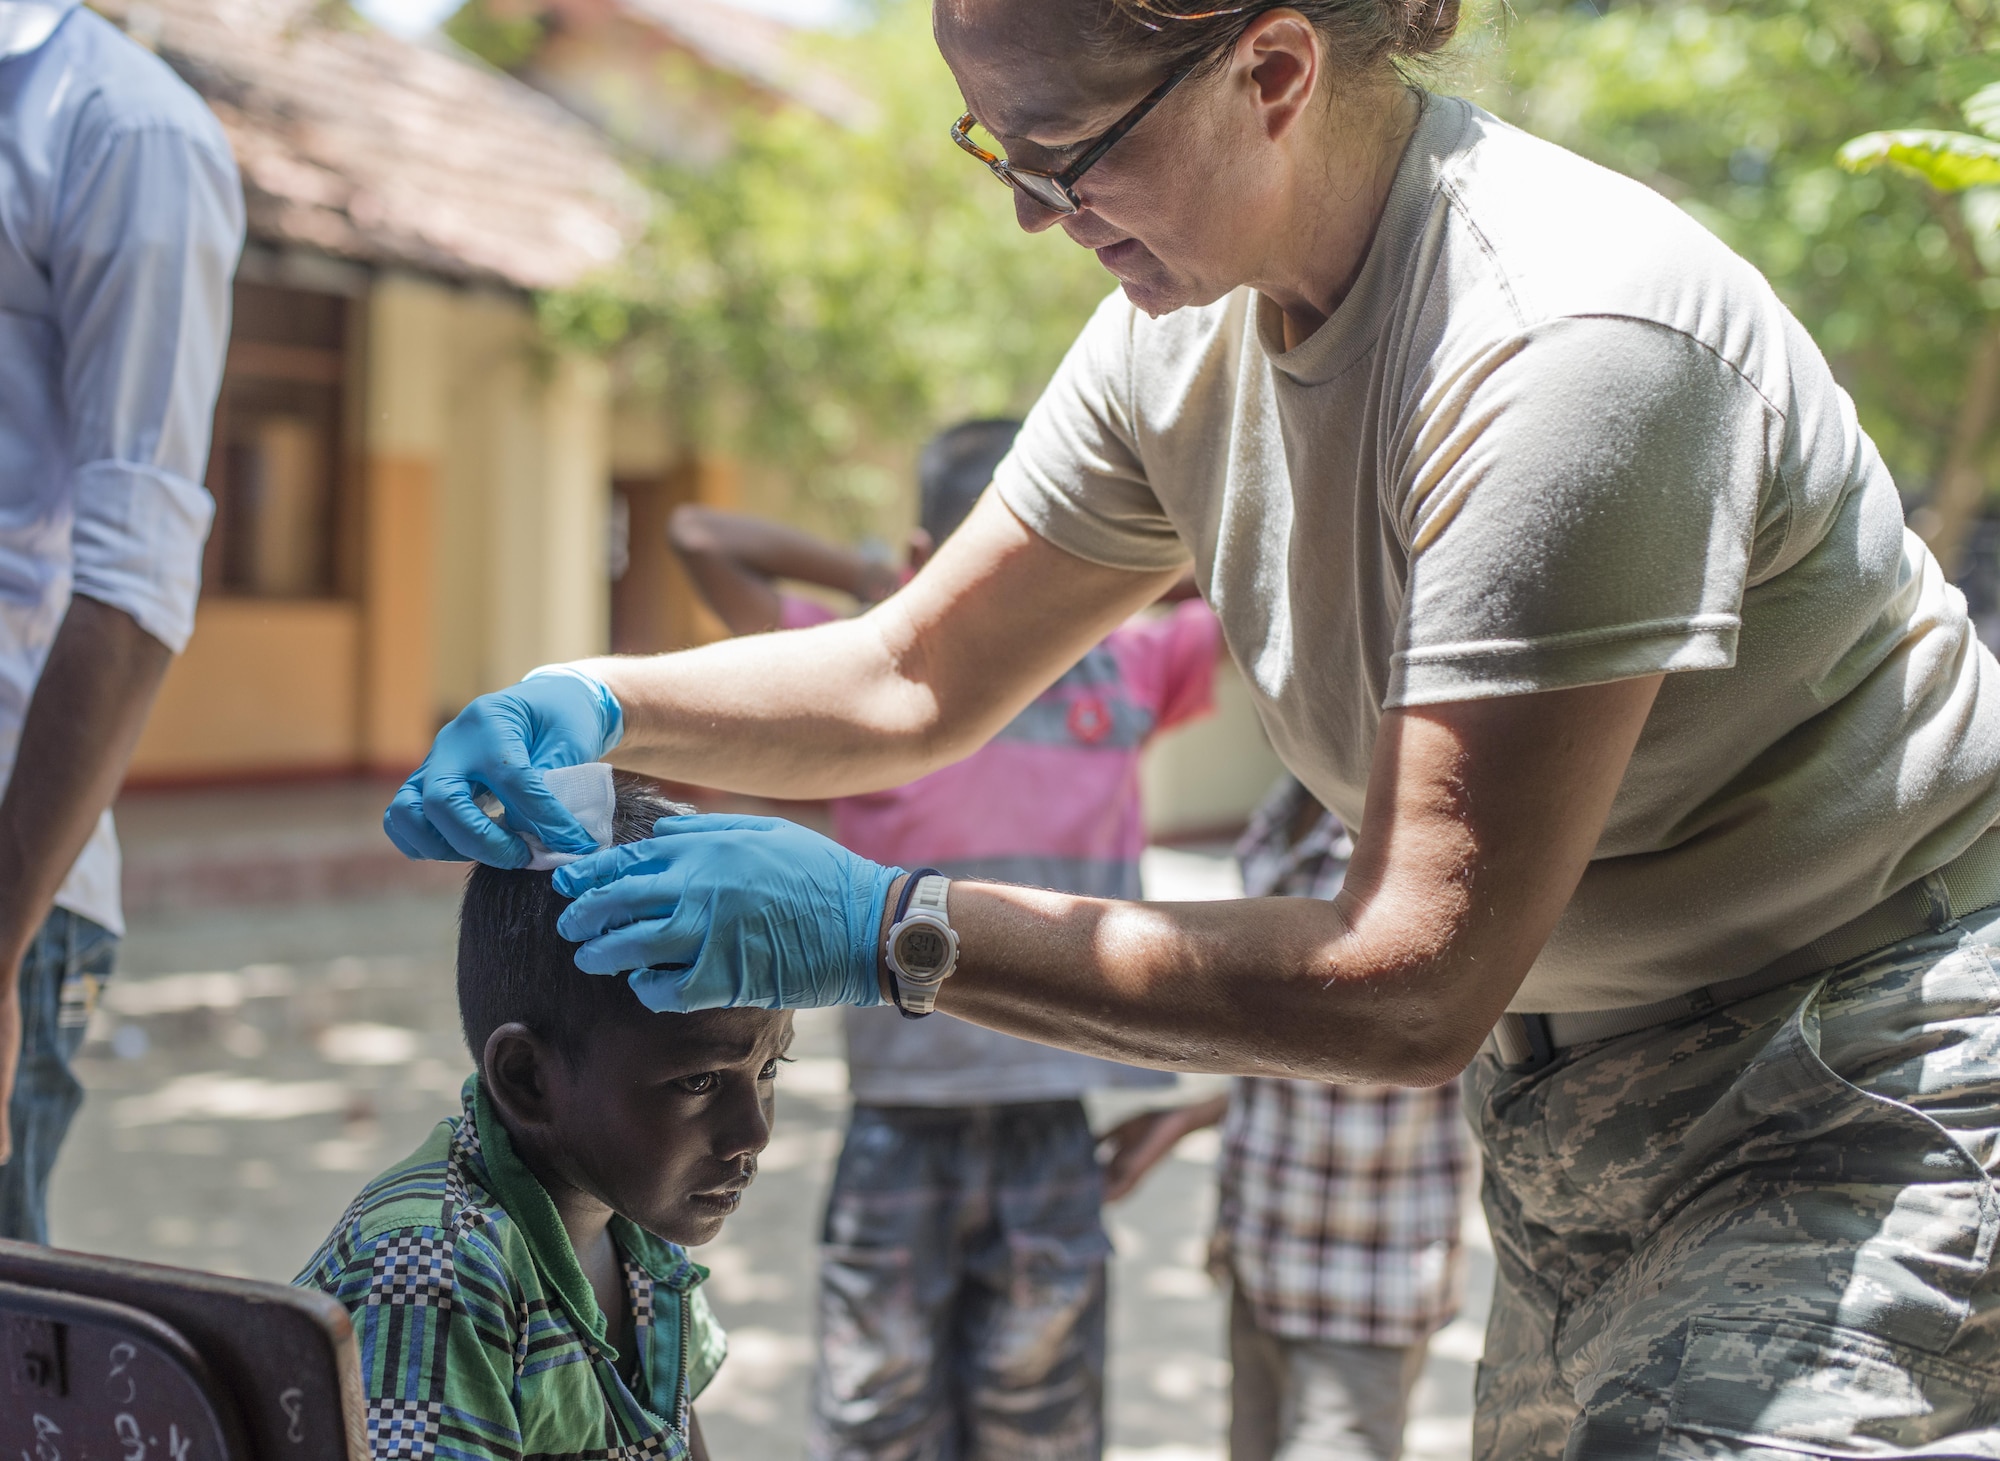 U.S. Air Force Staff Sgt. Victoria Campbell, 154th Medical Group medic, treats a childs head wound during Pacific Angel (PACANGEL) 16-3 in Jaffna, Sri Lanka, Aug. 20, 2016. PACANGEL is a total force, joint and combined humanitarian assistance/civil military operation led by U.S. Pacific Air Forces. Assistance during PACANGEL includes general health, dental, optometry and physical therapy. (U.S. Air Force photo by Senior Airman Brittany A. Chase)